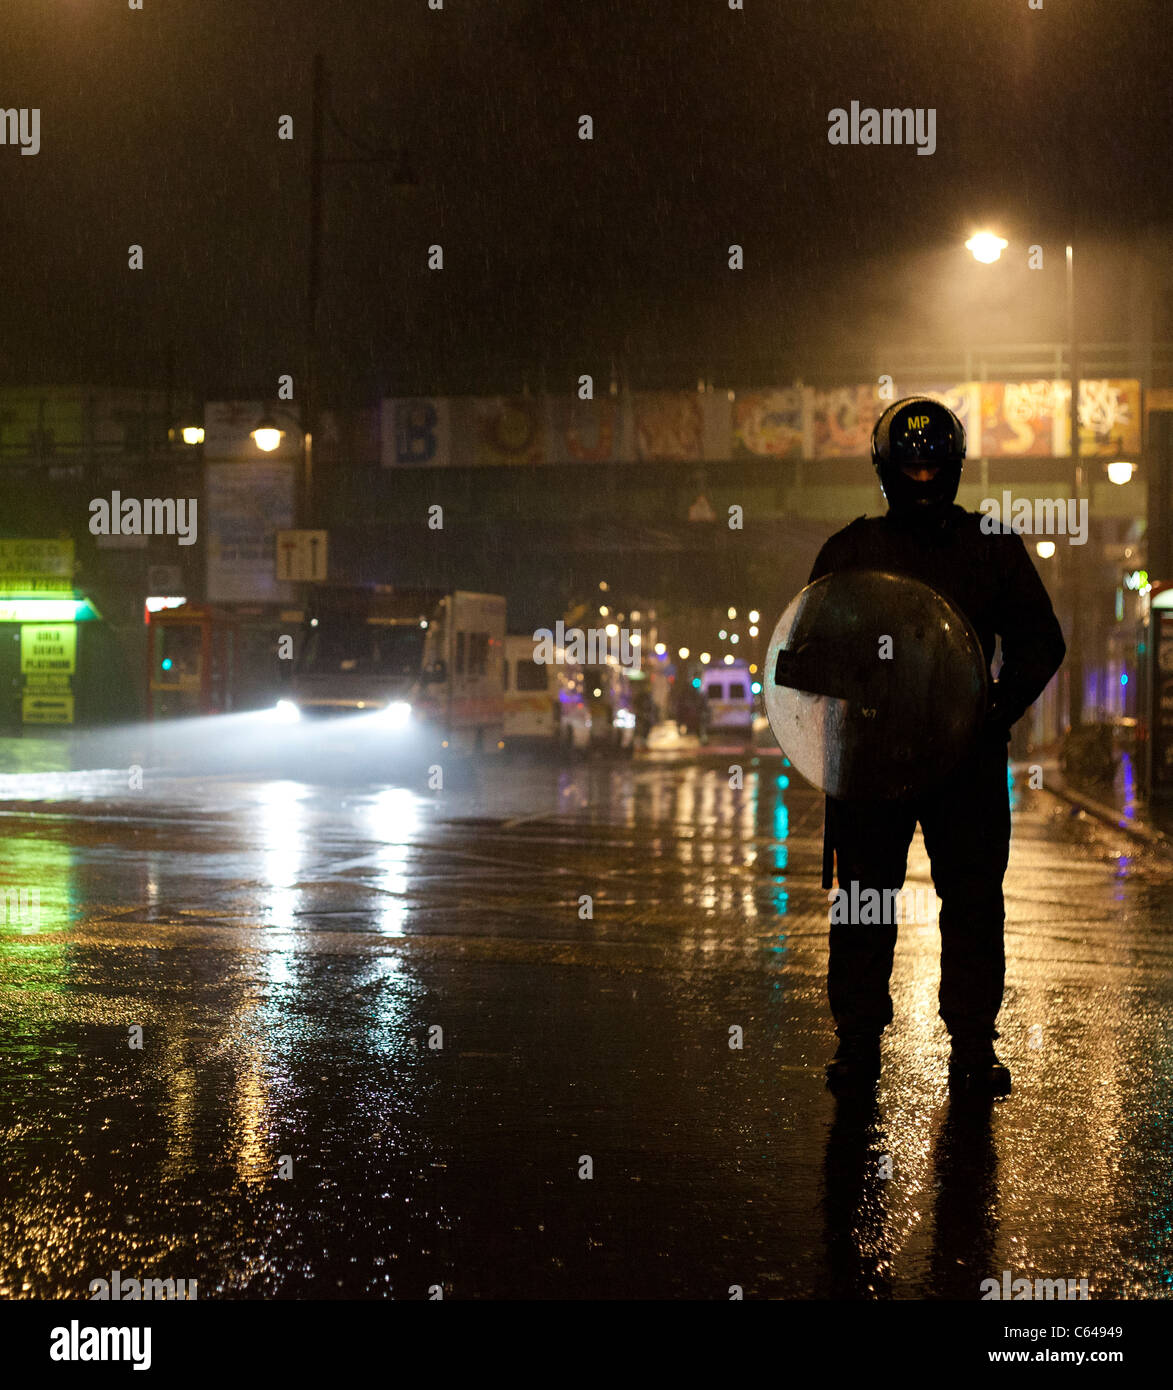 Police cordon the centre of Brixton in London after looters ransacked and burnt shops in the area. Stock Photo